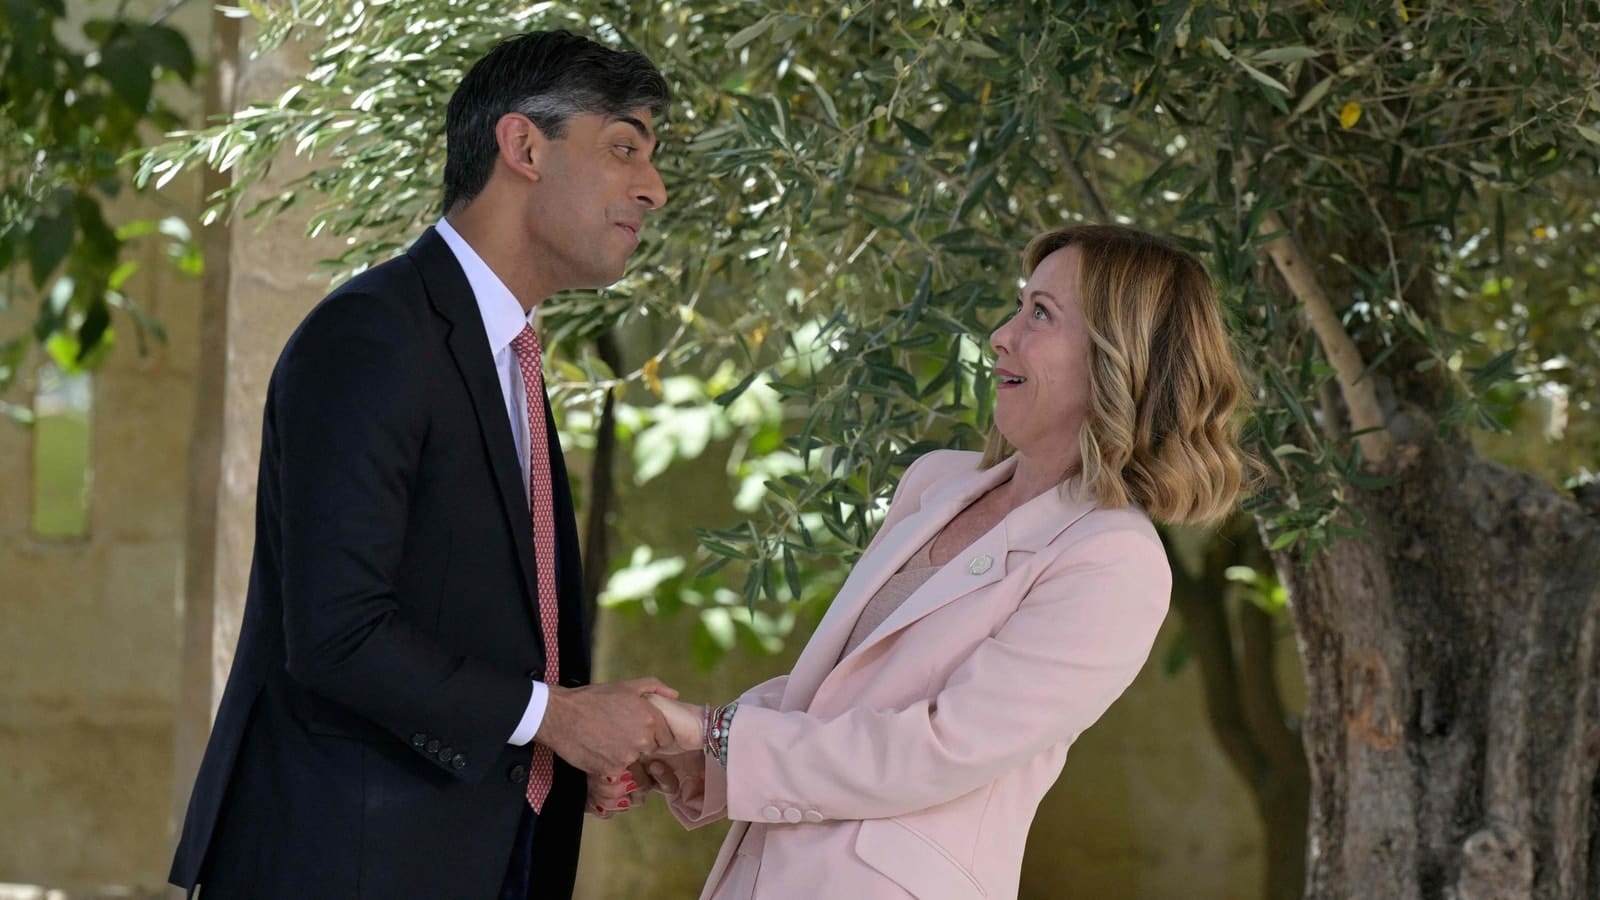 Rishi Sunak’s awkward hug-and-kiss moment with Italy PM Giorgia Meloni is viral: ‘Smelly breath energy’